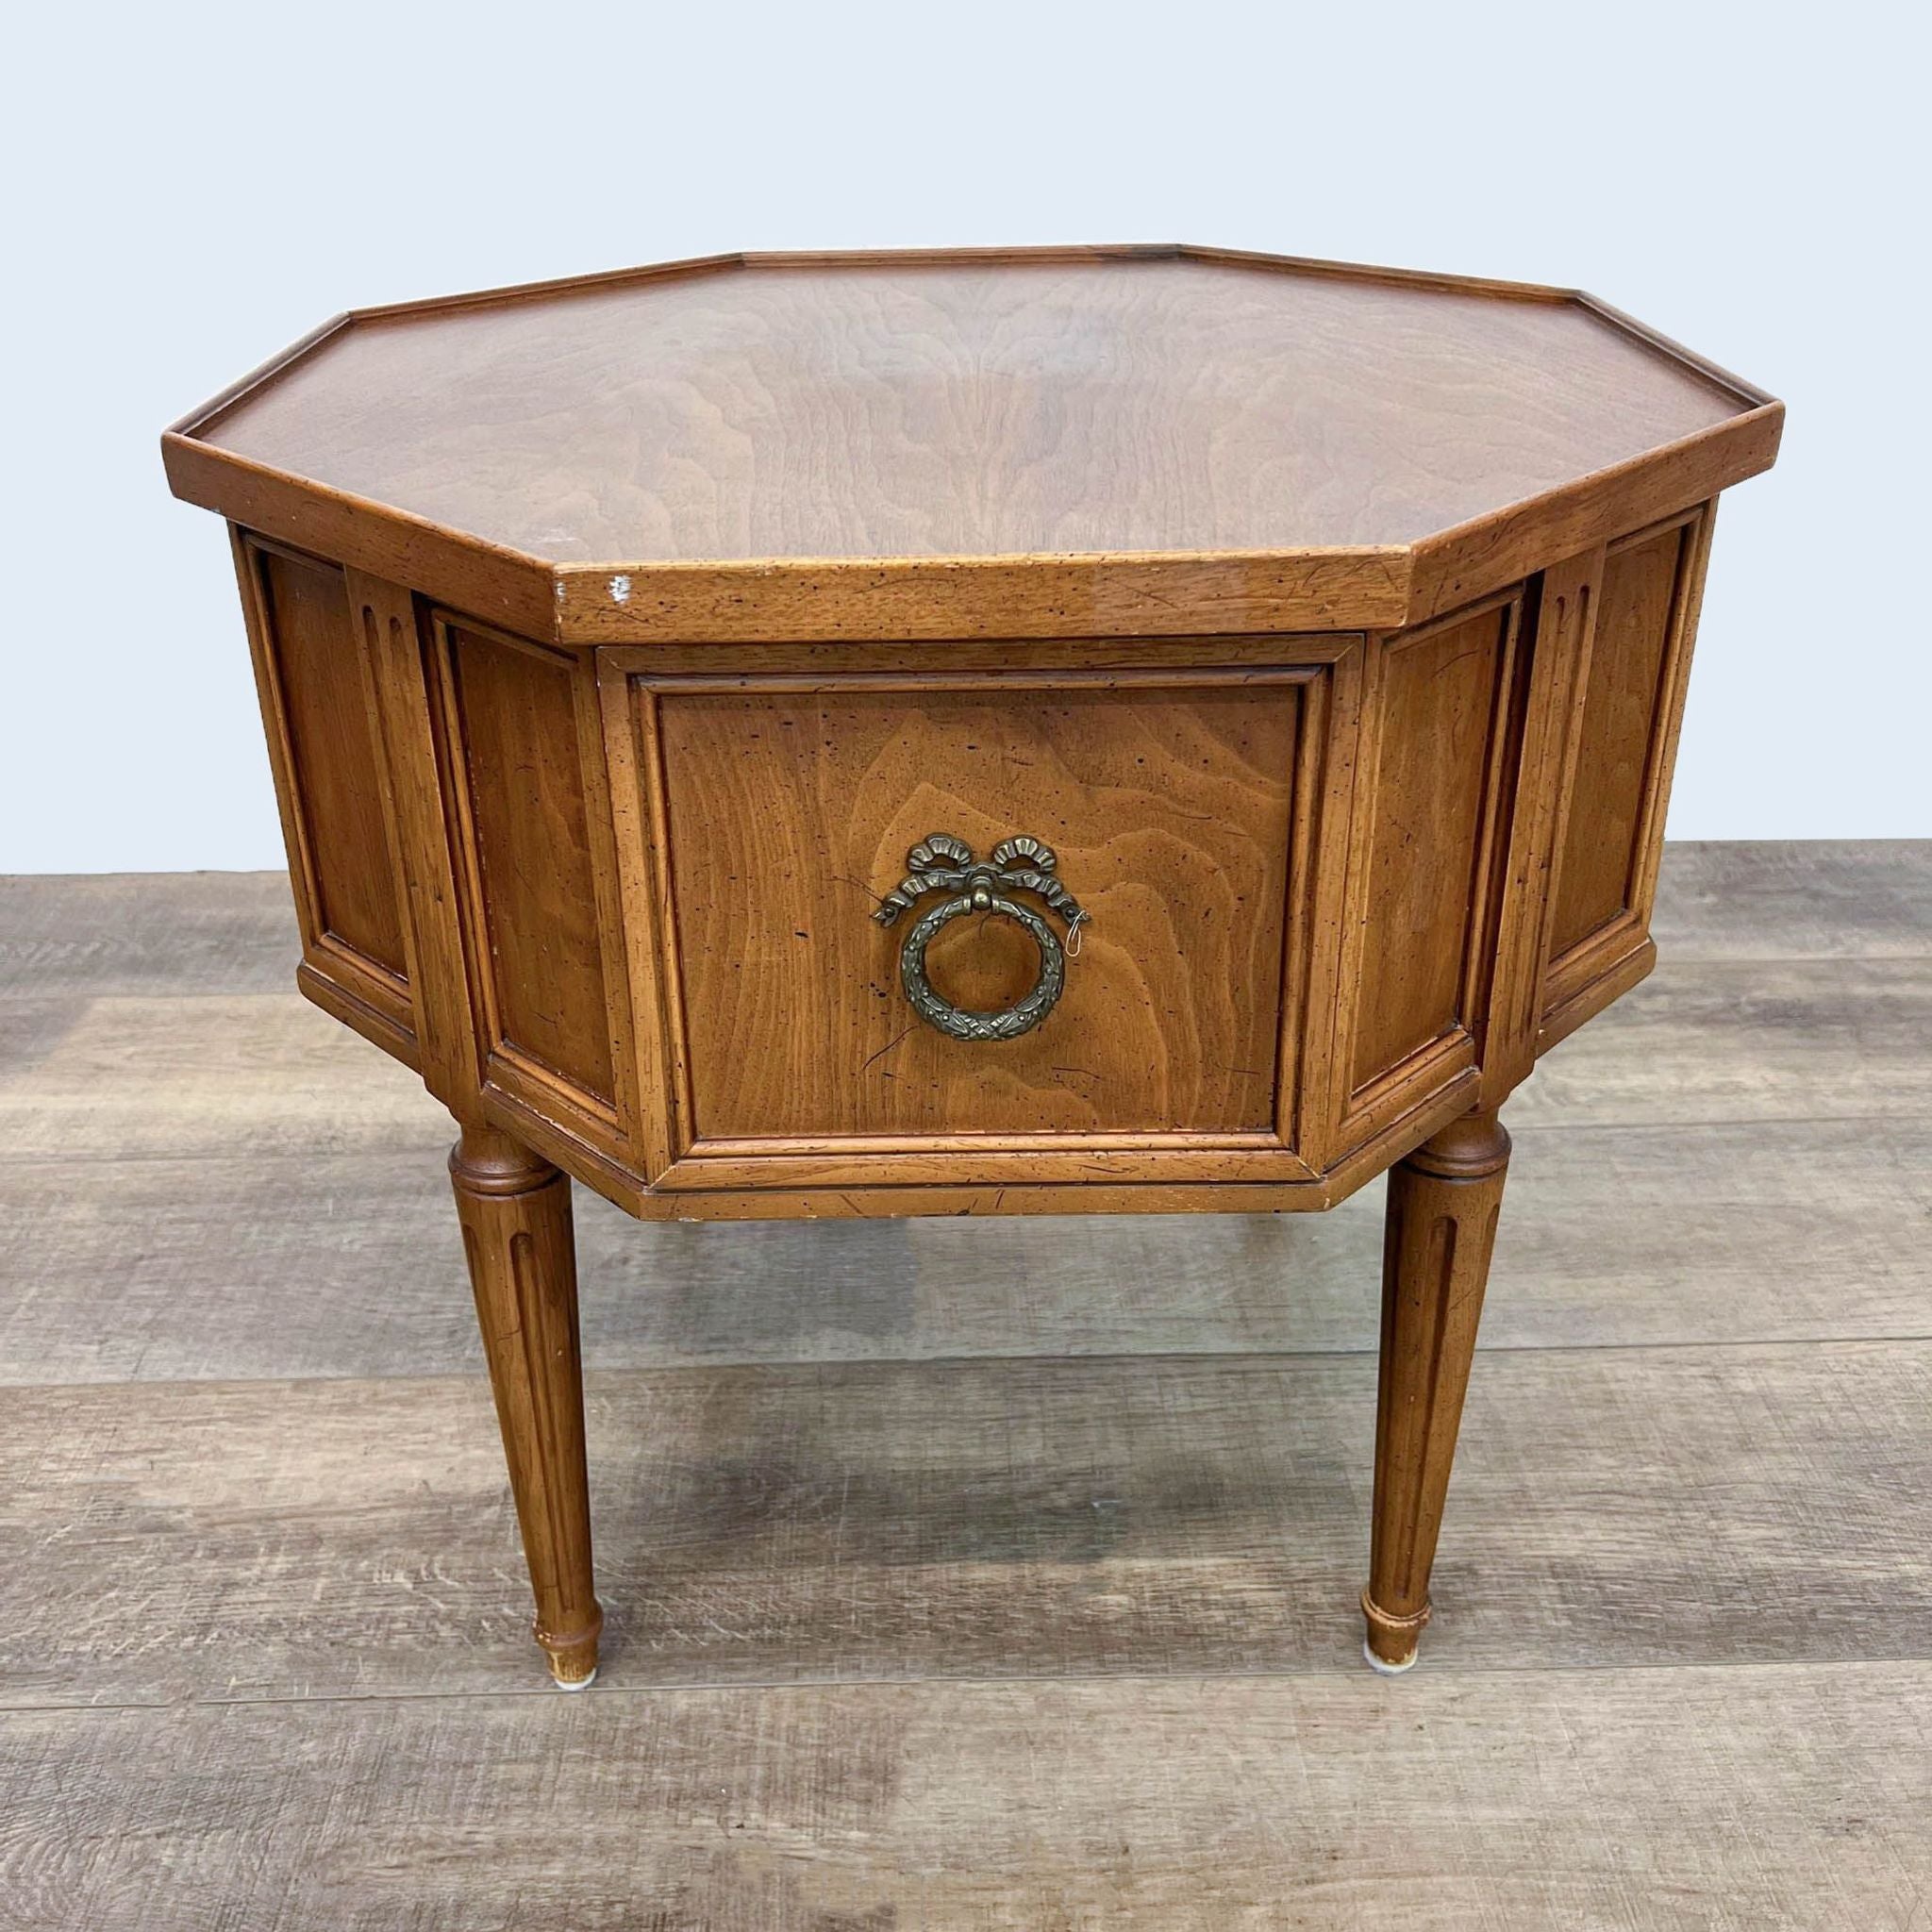 Hexagonal wooden end table by Reperch with a closed drawer and ornate metal pull, standing on tapered legs.